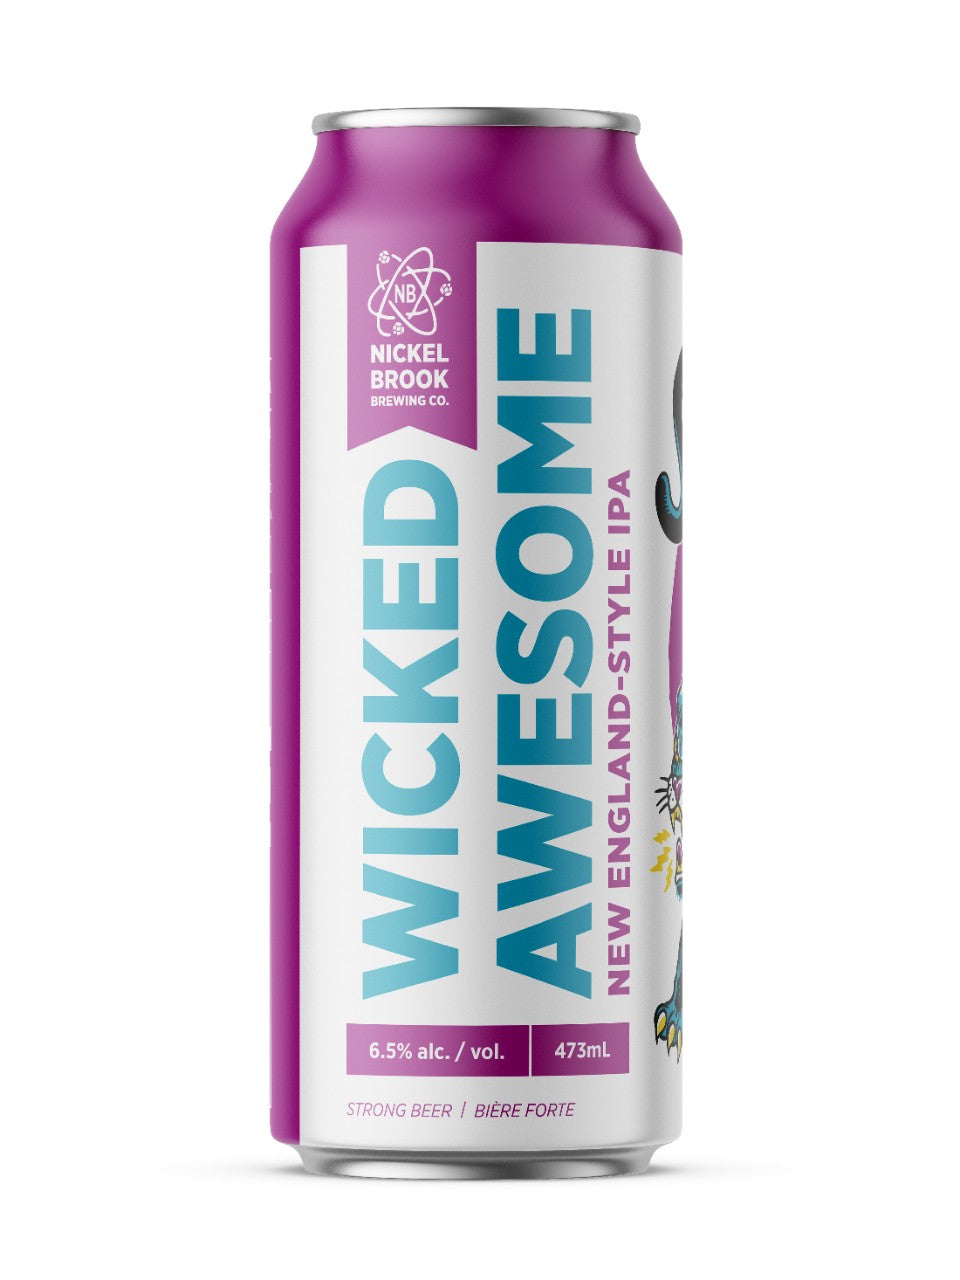 Nickel Brook Wicked Awesome IPA 473 mL can